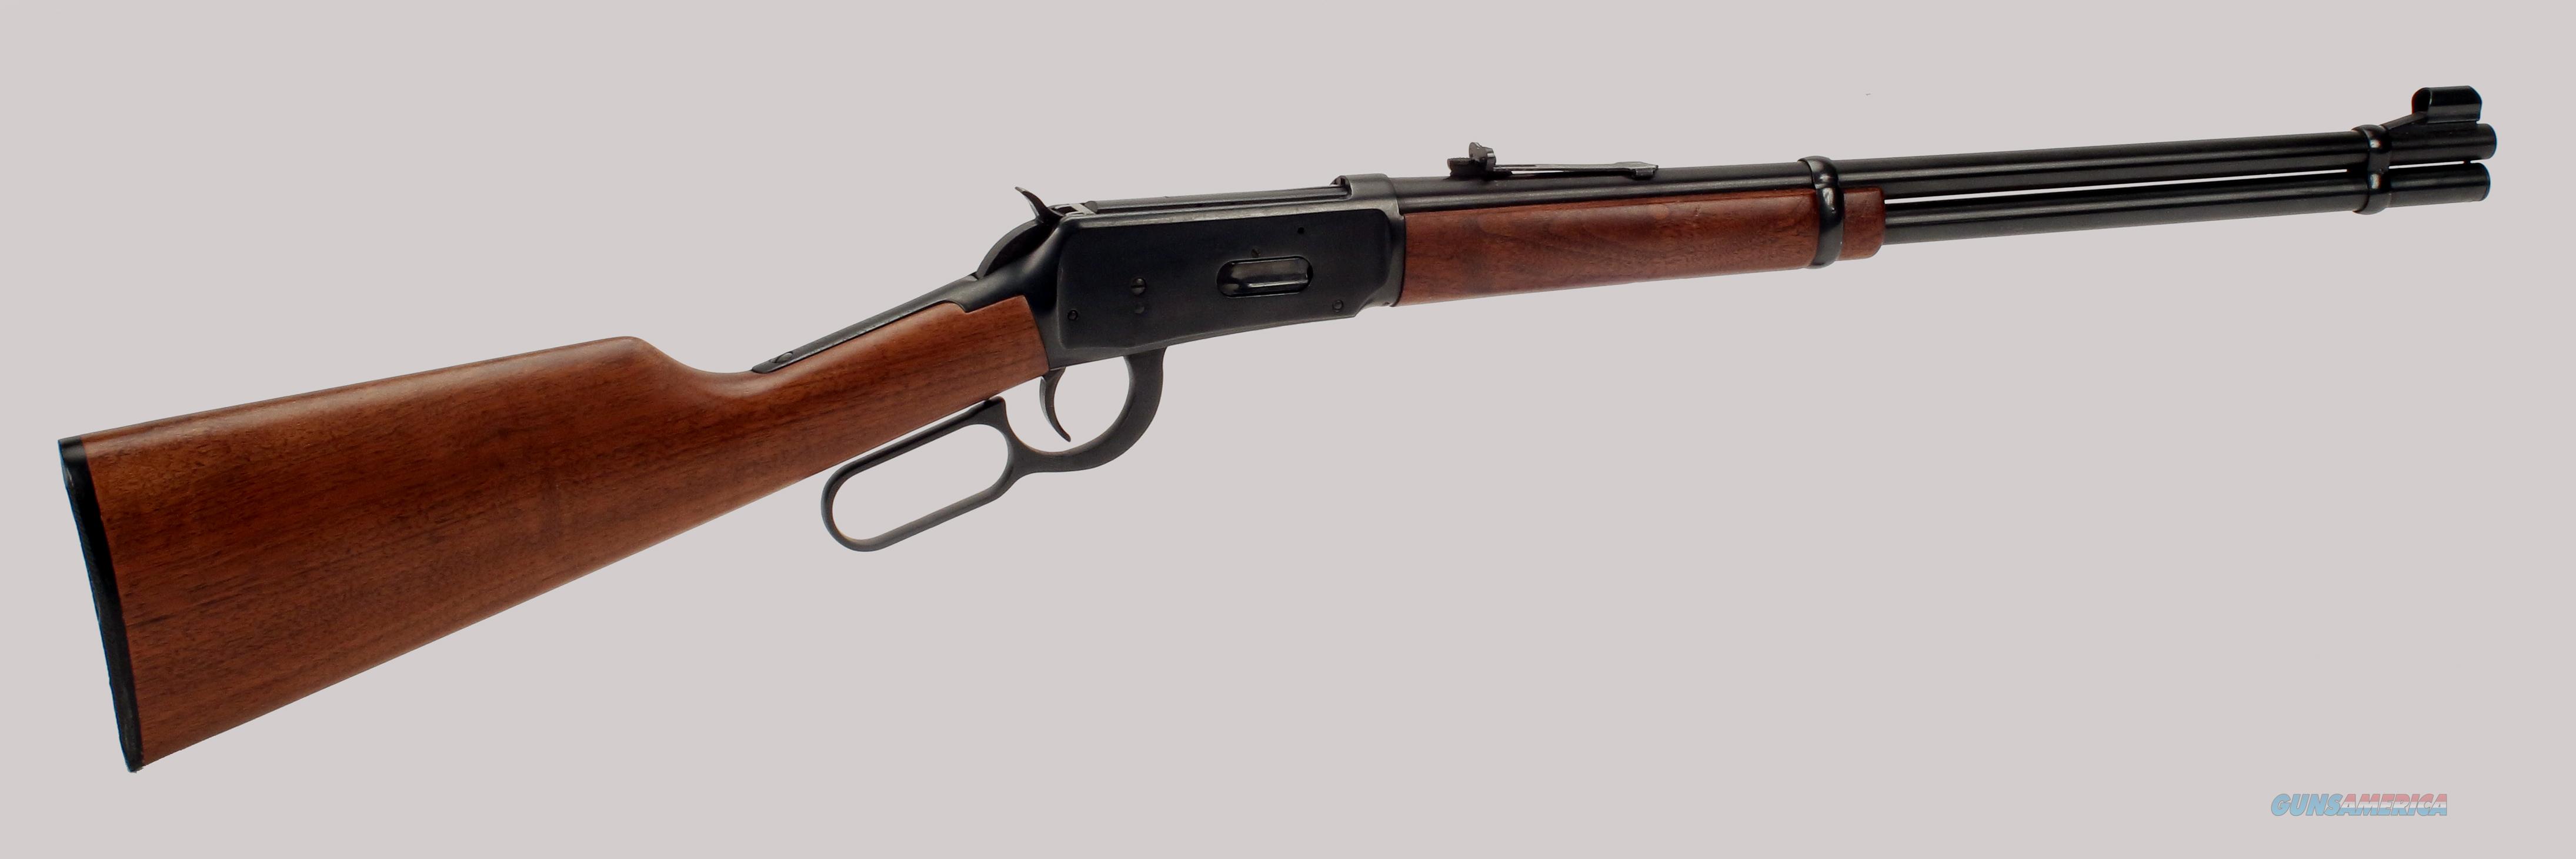 Winchester Rifle #25